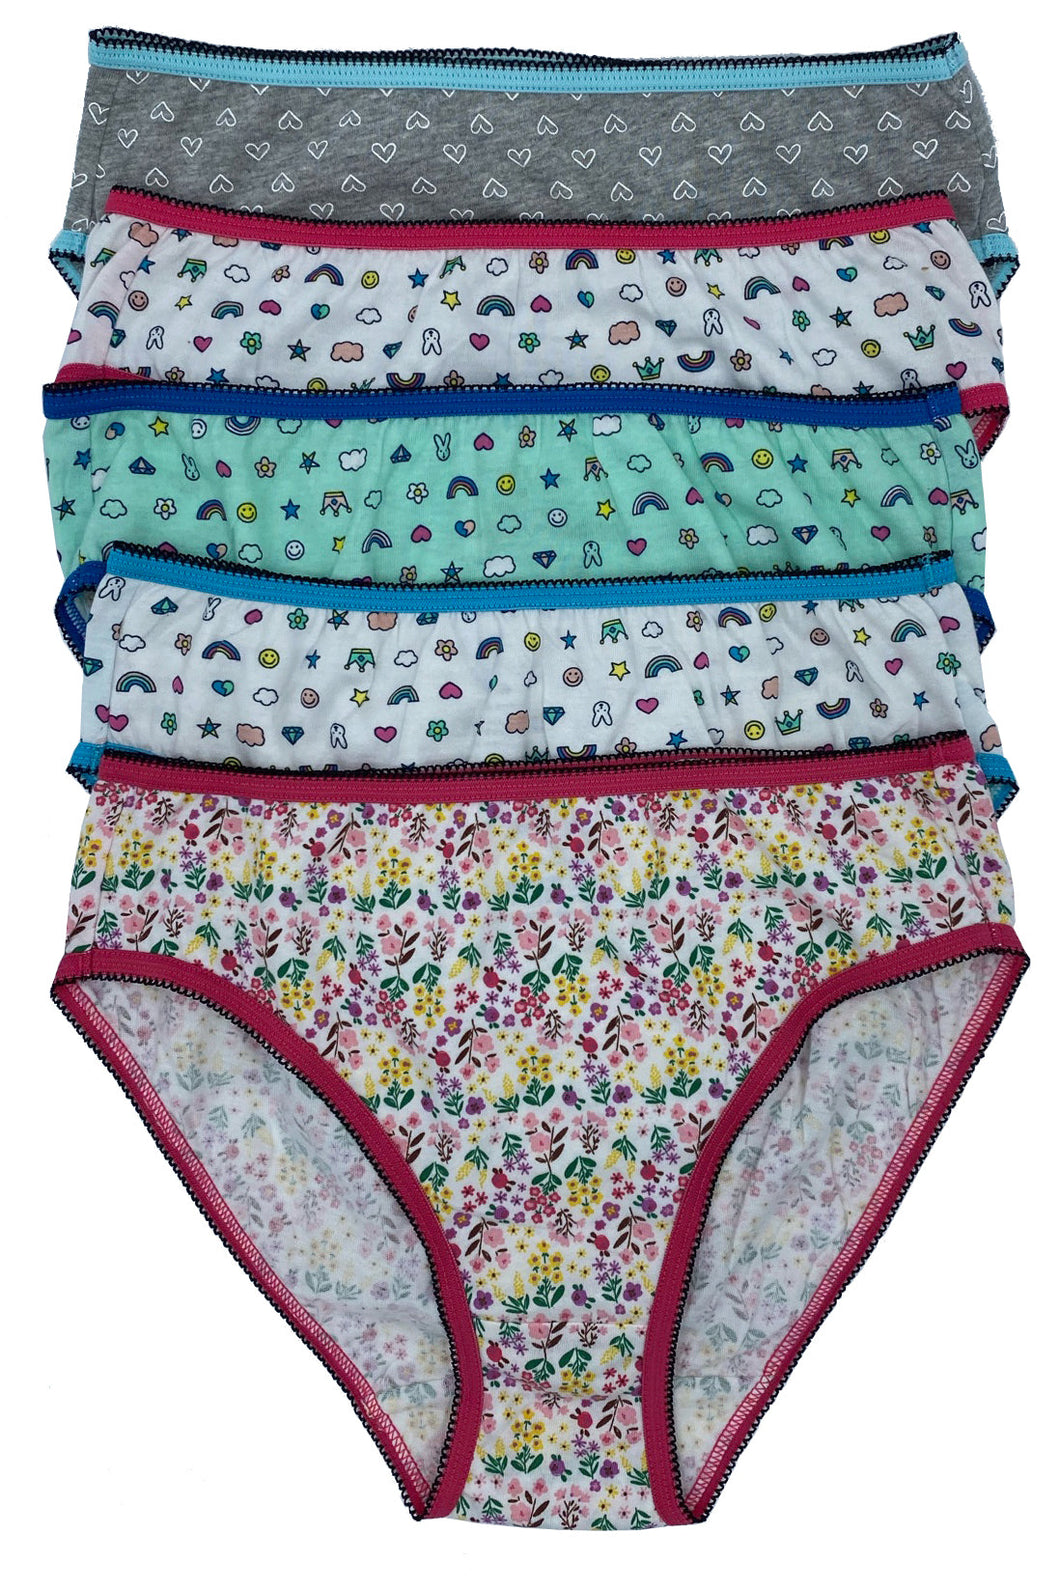 Cotton Hi-Cut Underwear for Girls in Assorted Colors EX804224Y